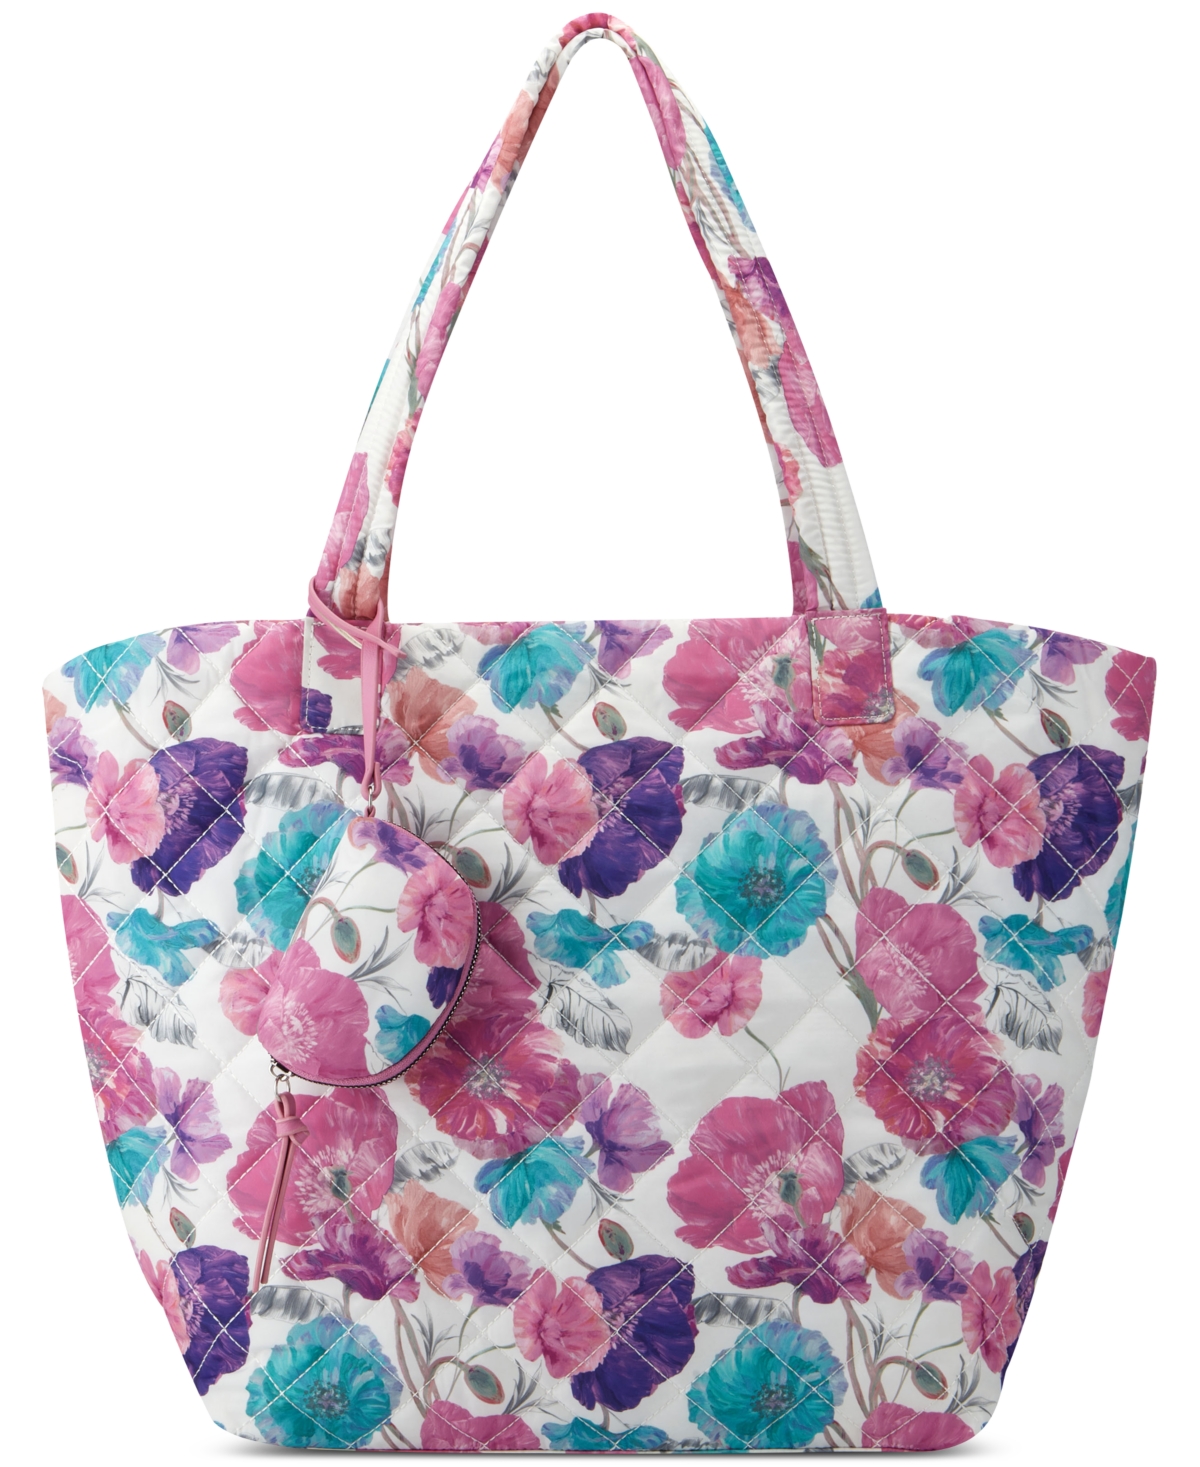 INC INTERNATIONAL CONCEPTS BREEAH EXTRA-LARGE TOTE, CREATED FOR MACY'S